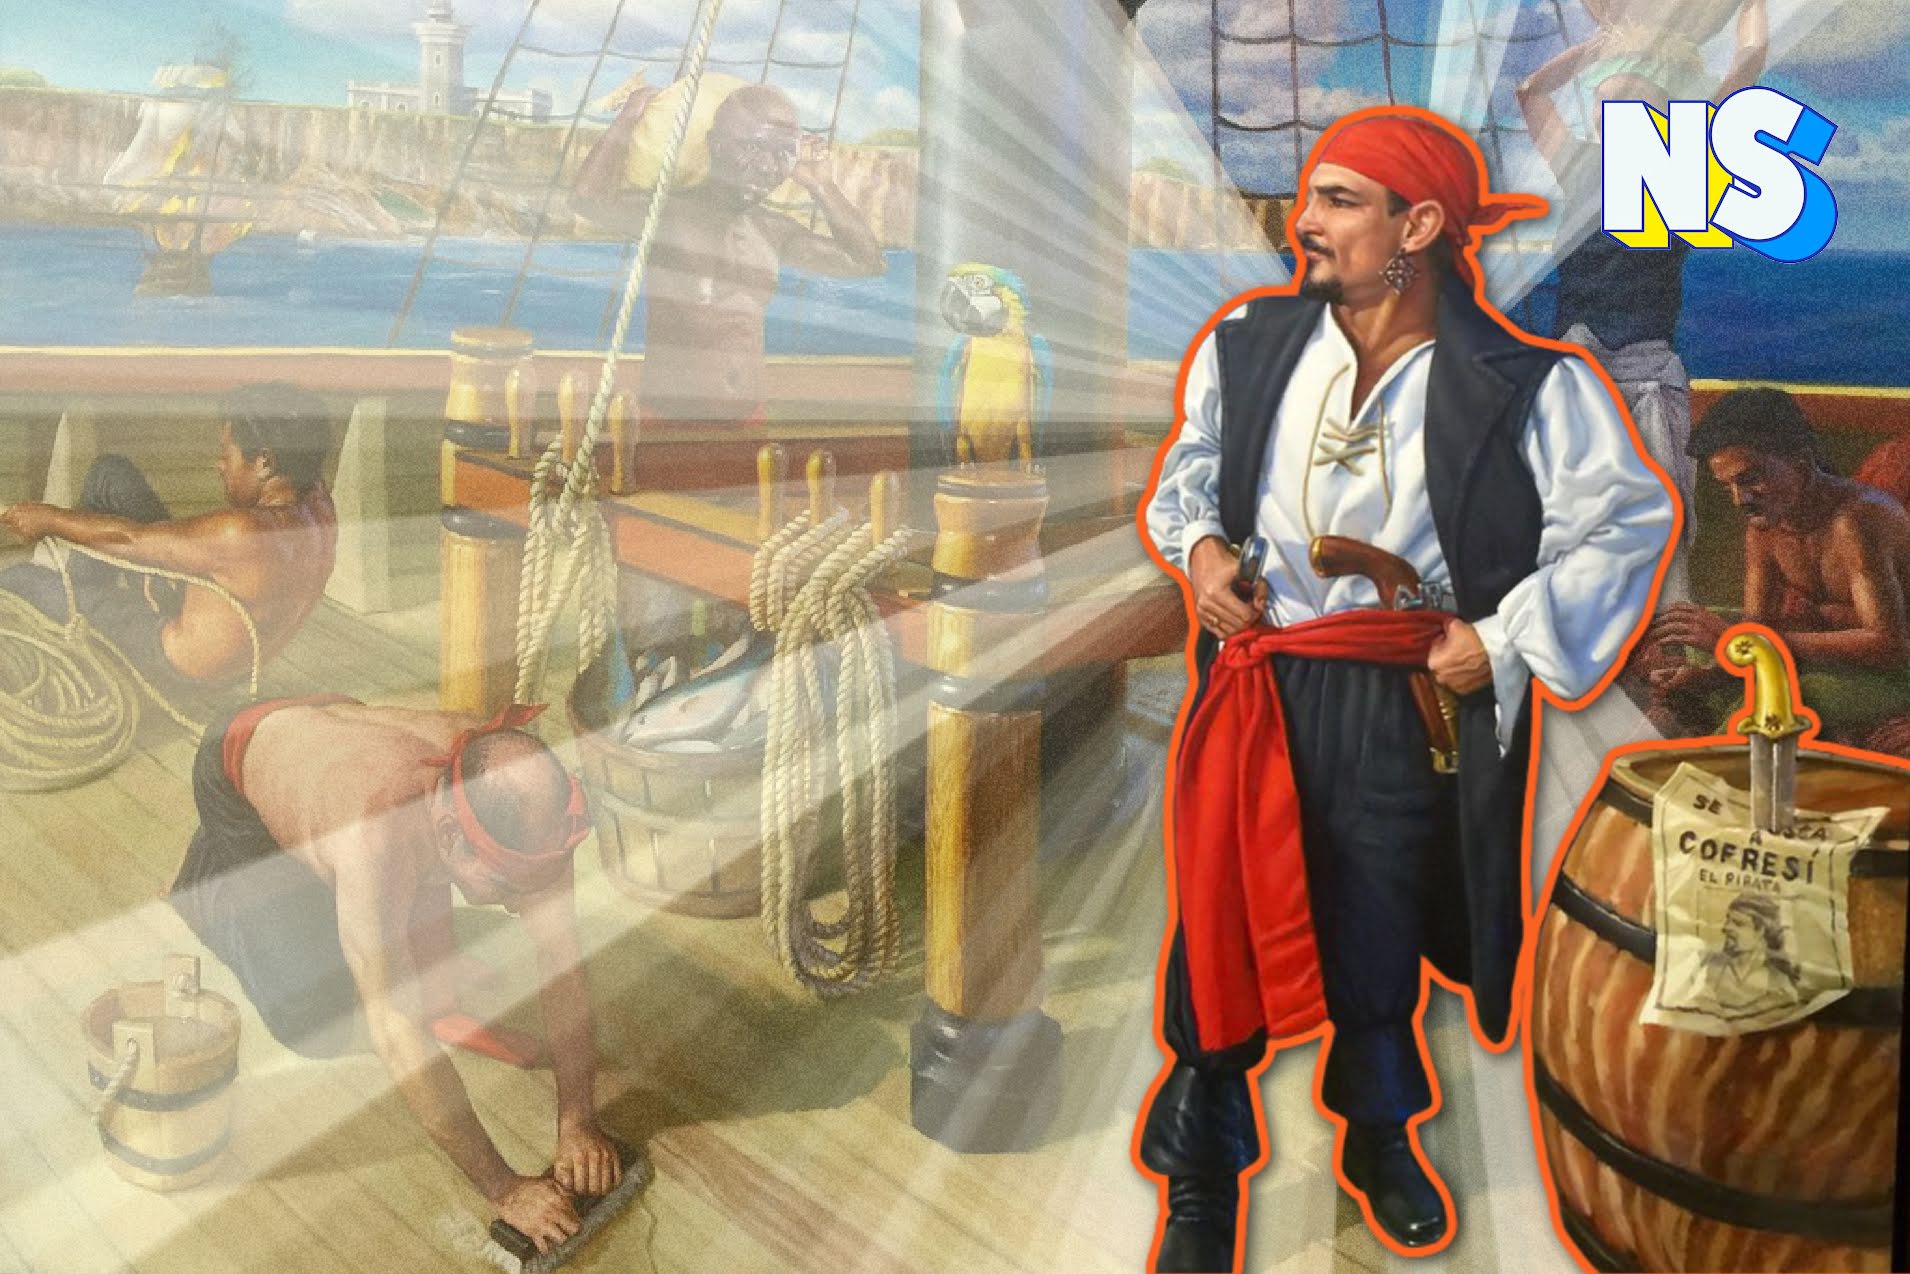 Roberto Cofresí, the Last Great Pirate That Graced the Caribbean nuestro stories